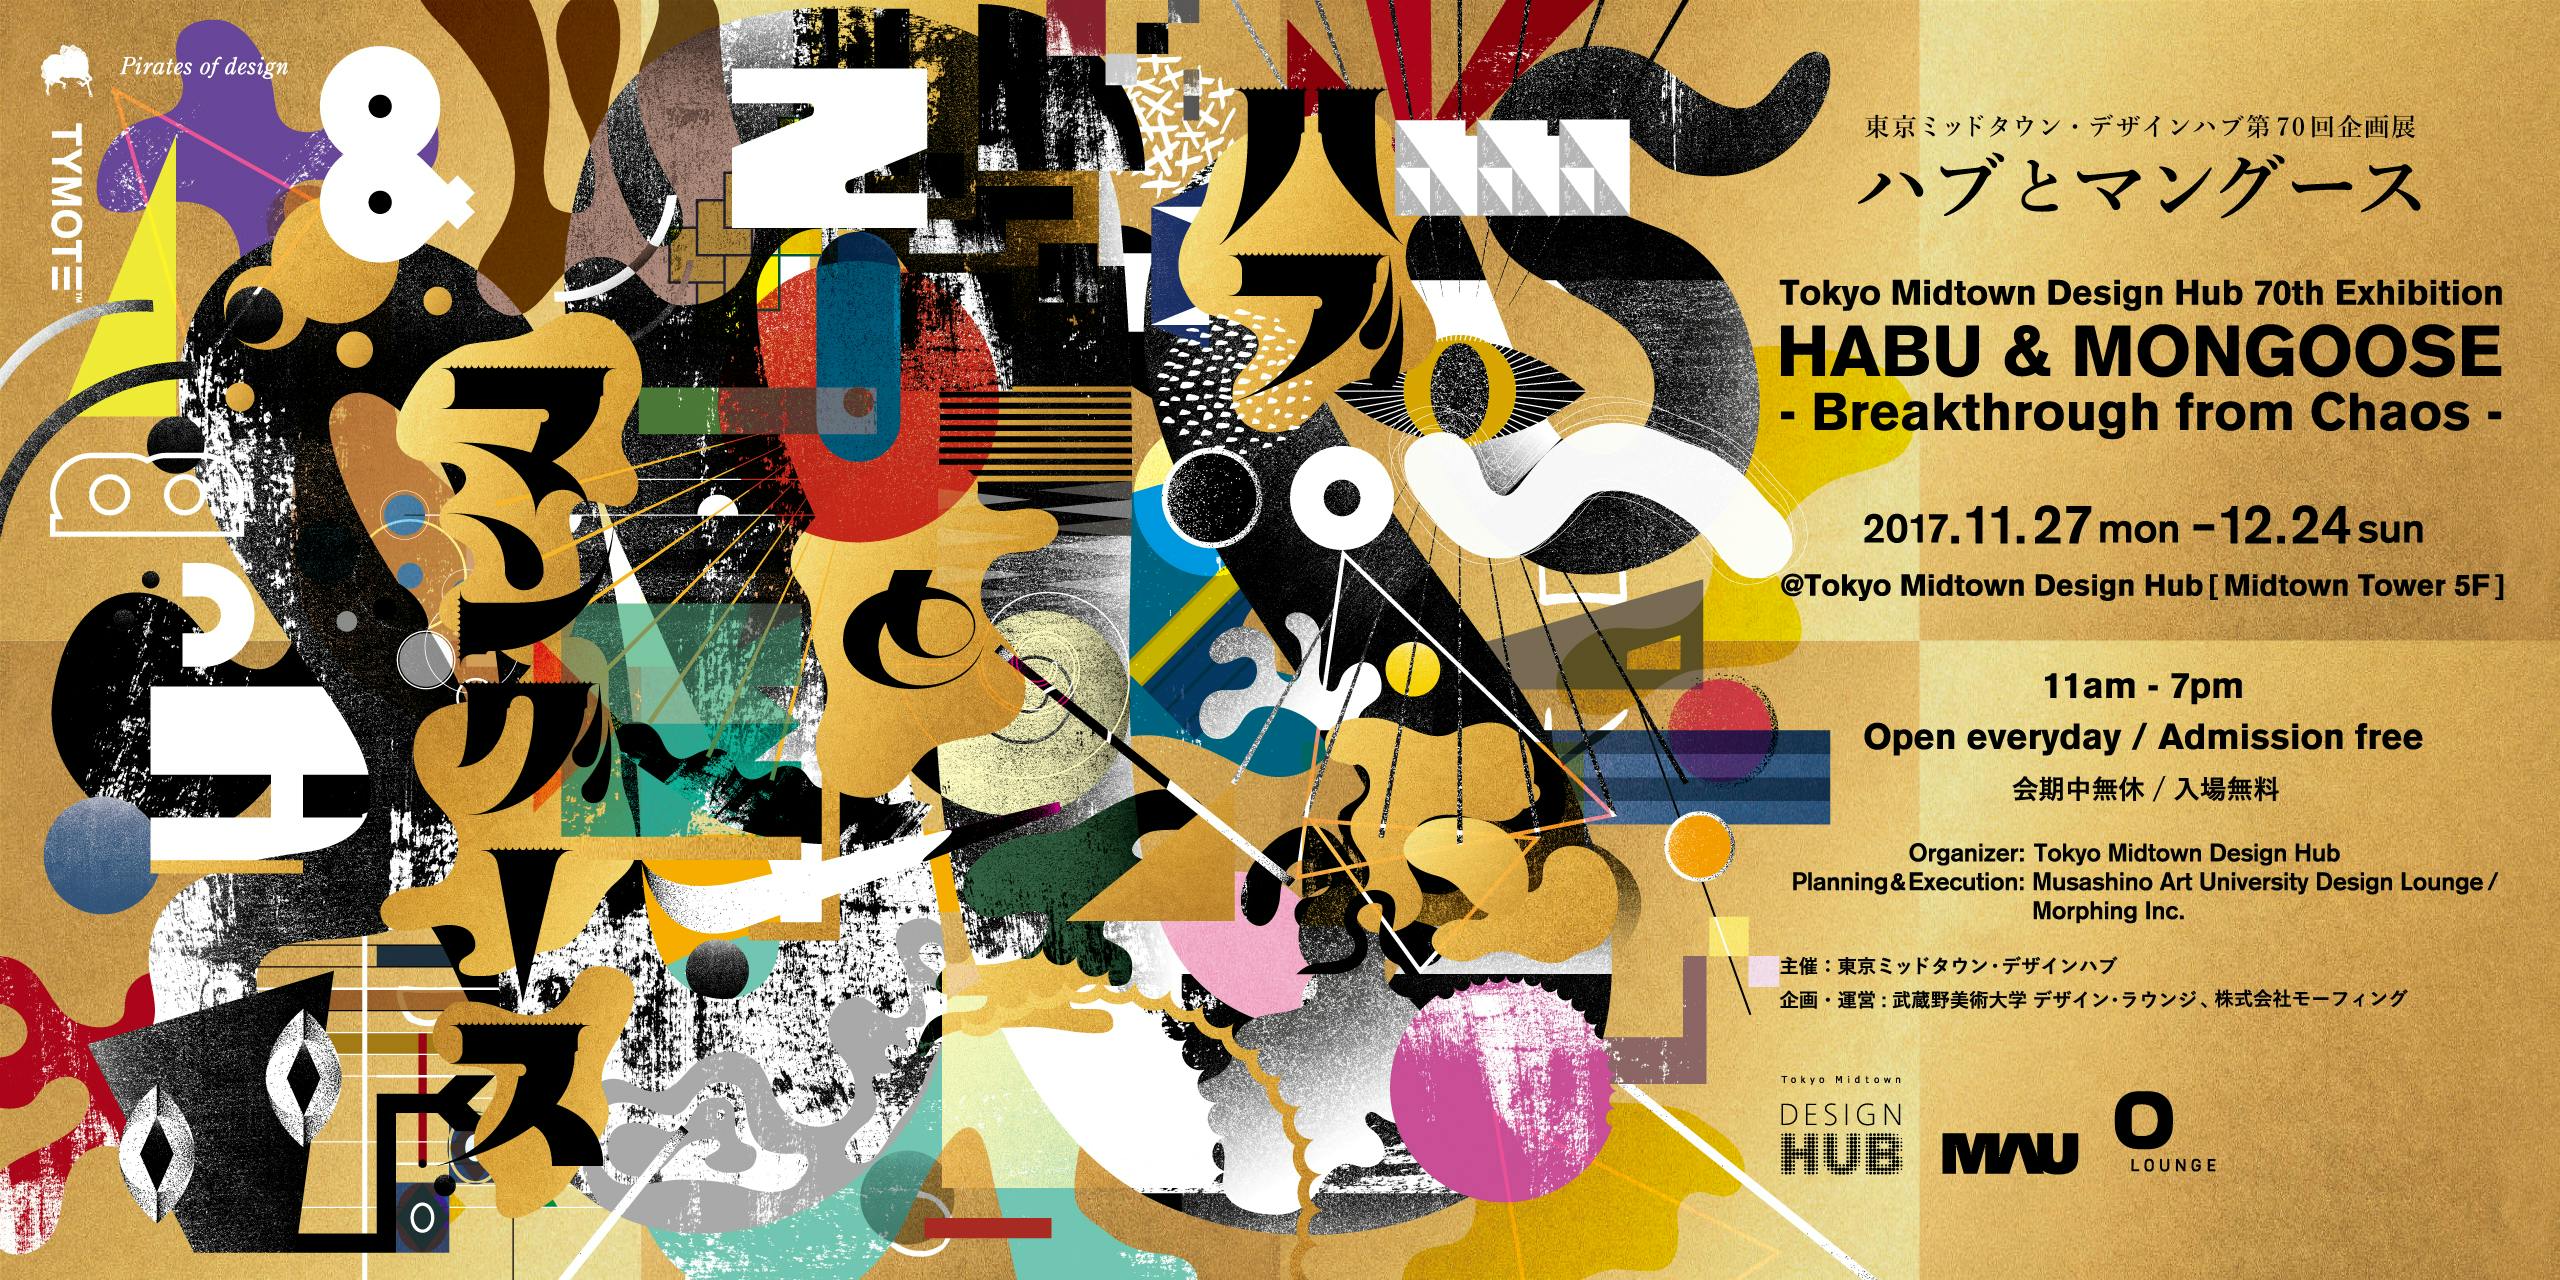 HABU & MONGOOSE -Breakthrough from Chaos-